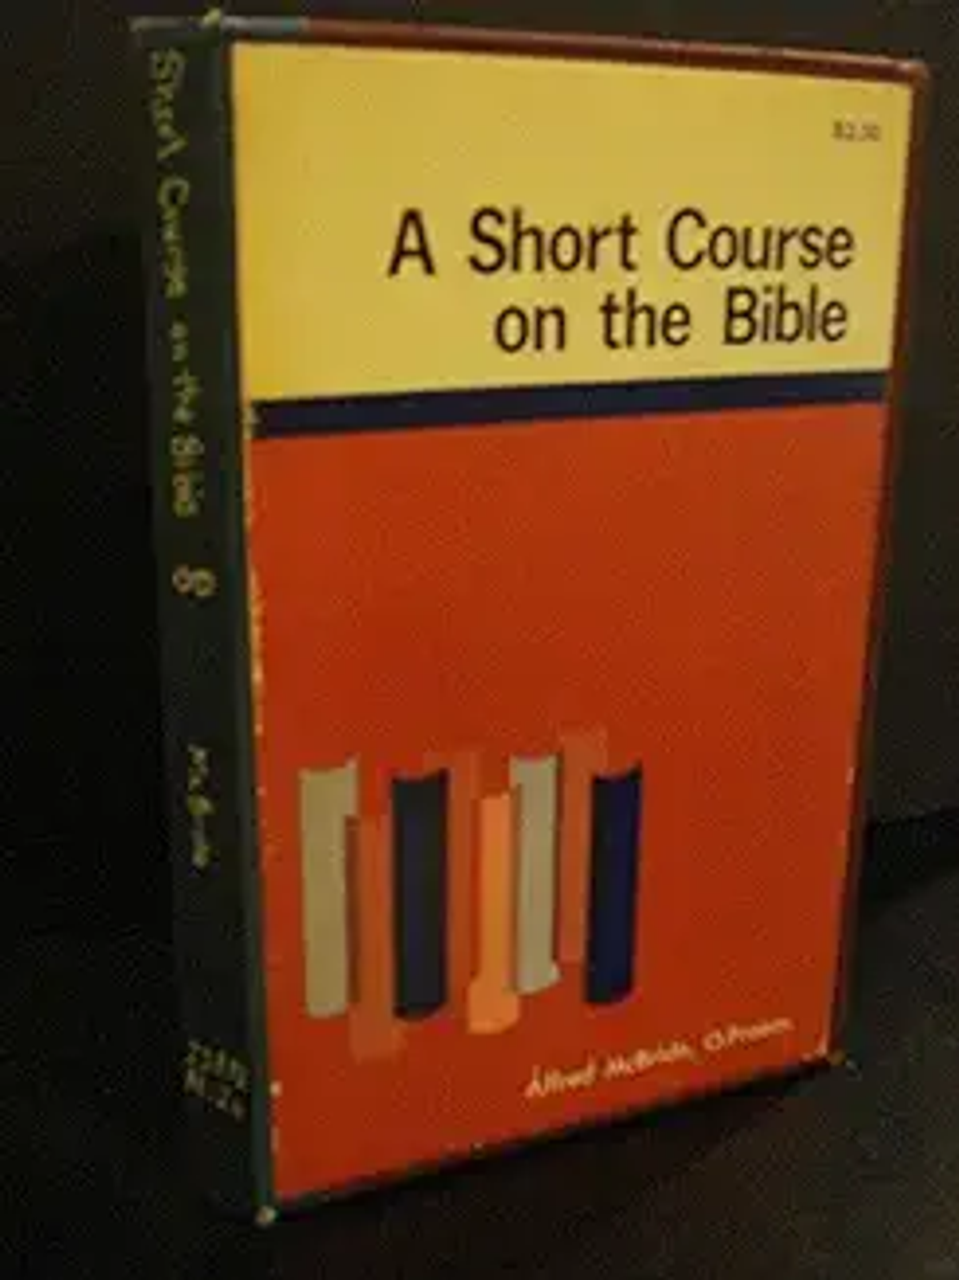 A Short Course on the Bible by Alfred McBride 